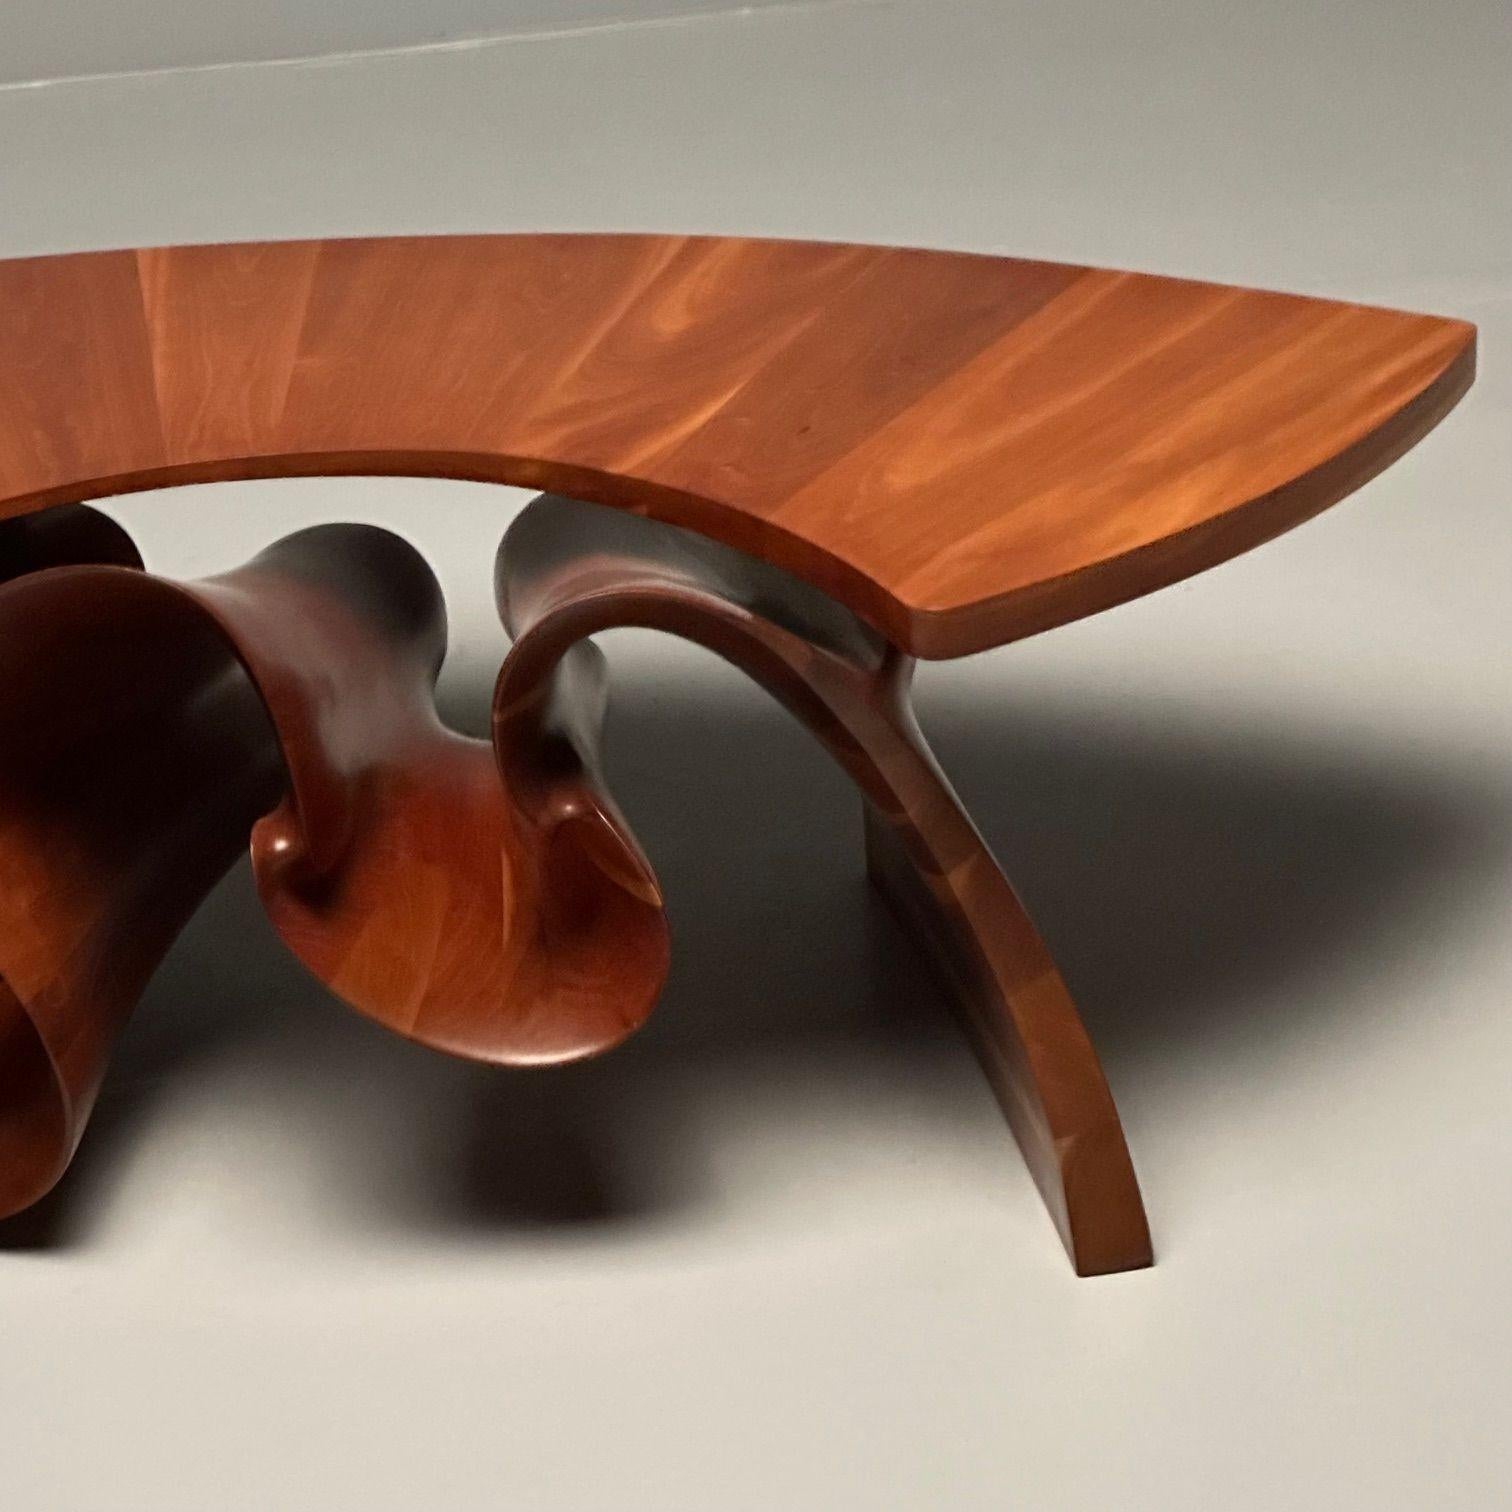 Peter Michael Adams, Mid-Century, Sculptural Coffee Table, Walnut, USA, 1970s For Sale 4